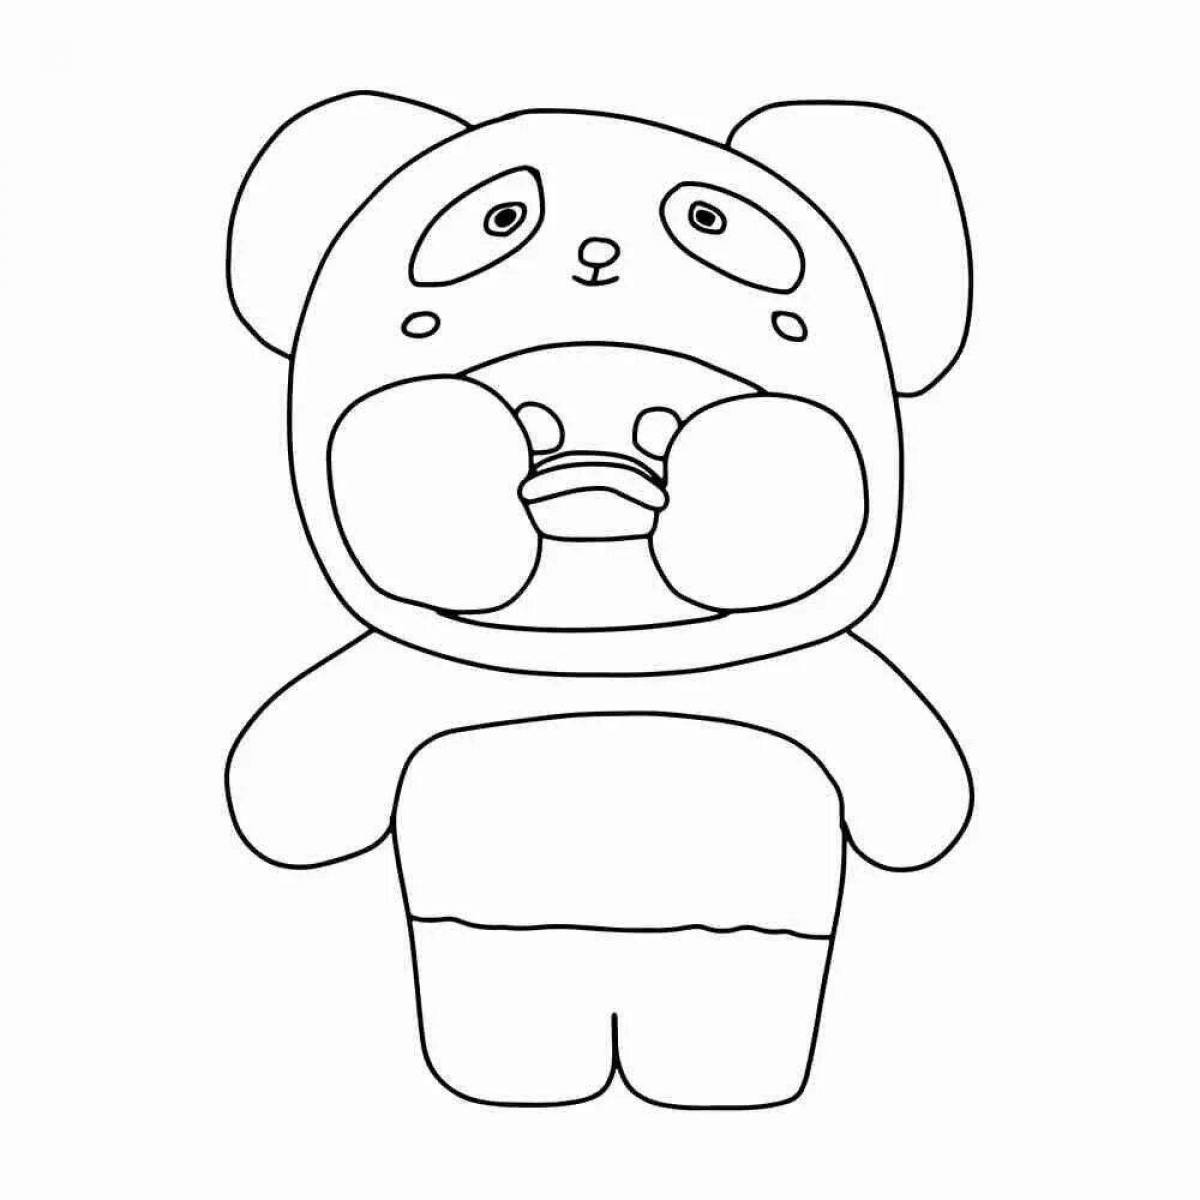 Coloring page cute fan of lalaphan